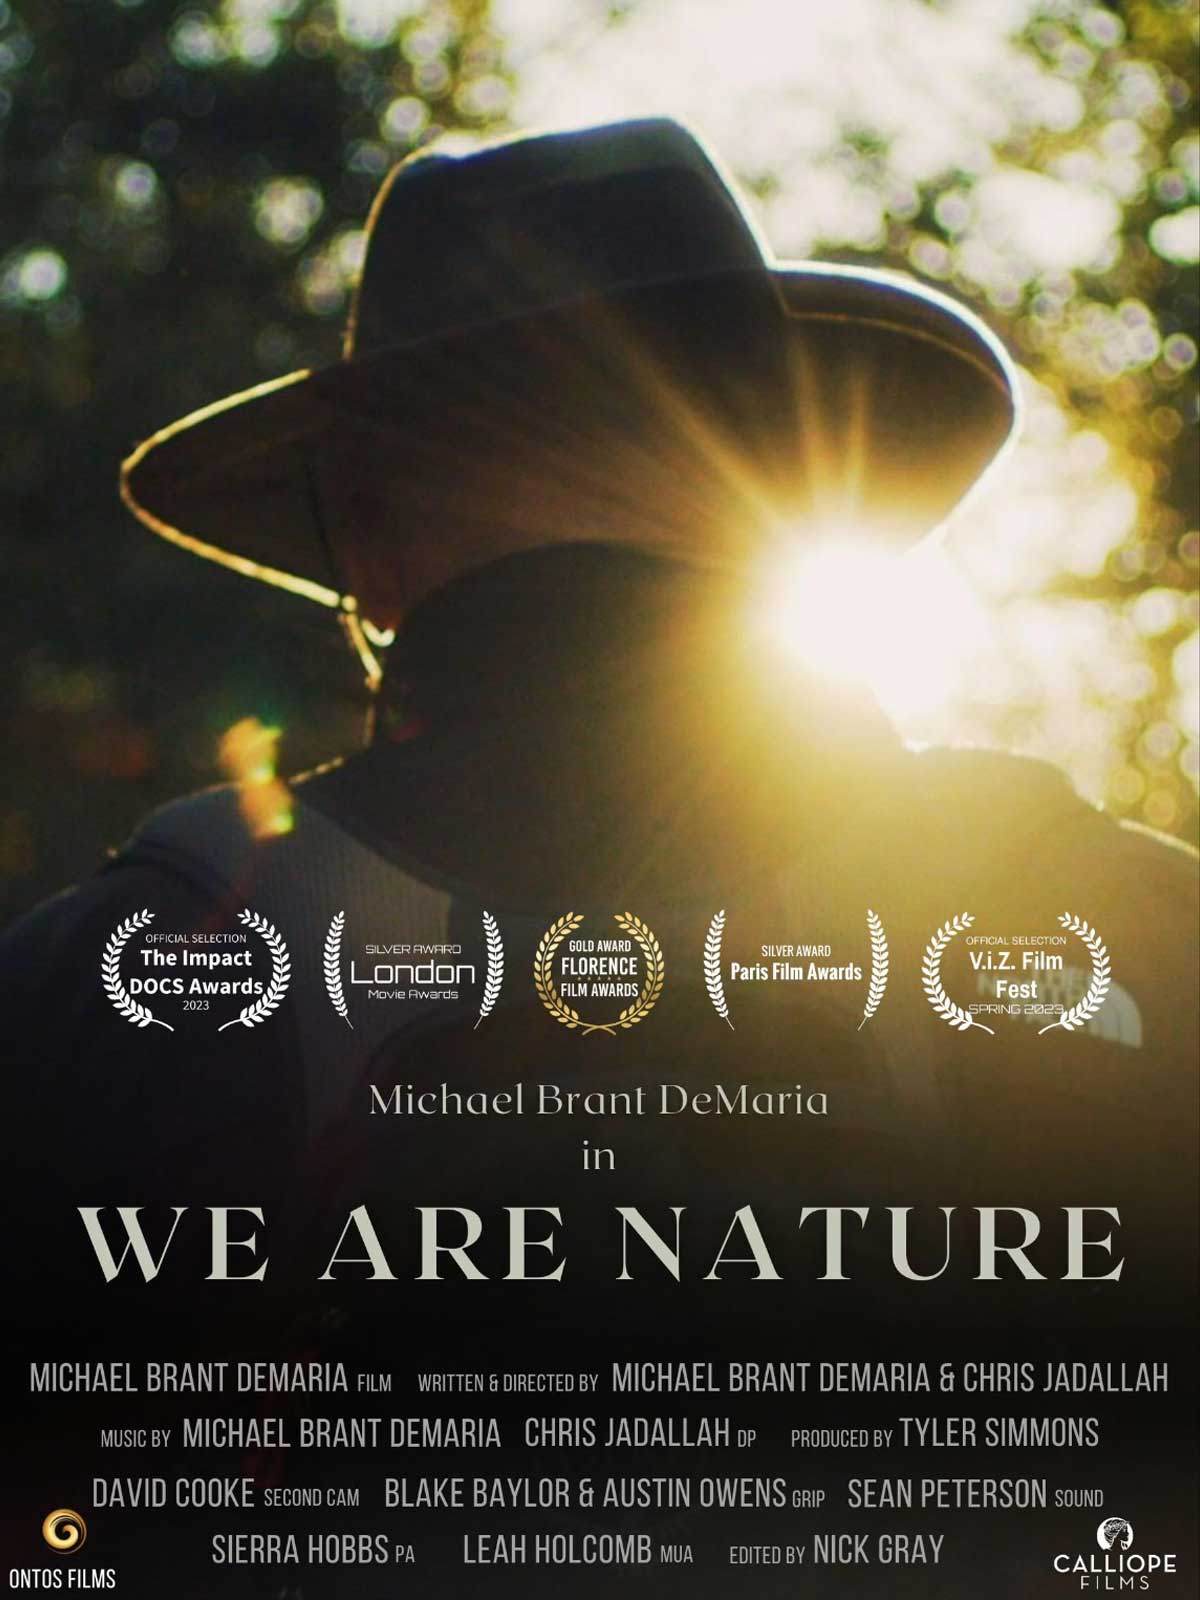 michael-demaria-ontos-films-we-are-nature